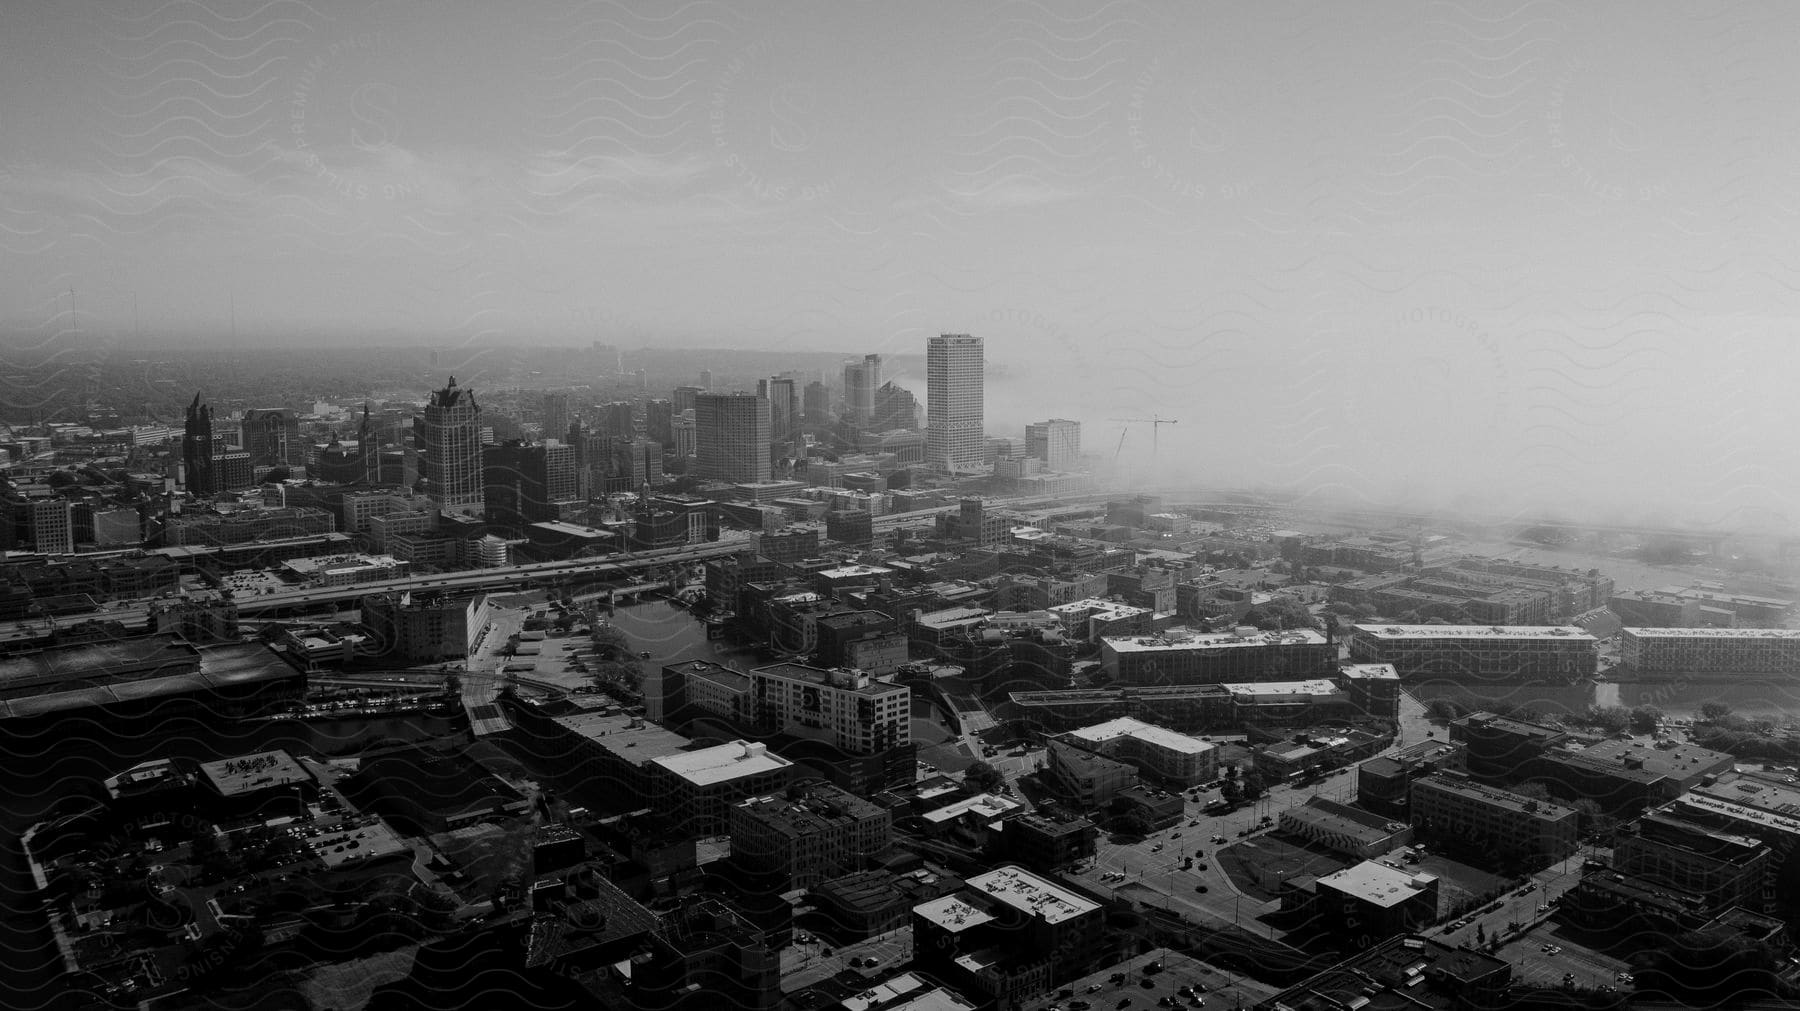 A black and white aerial view of a city